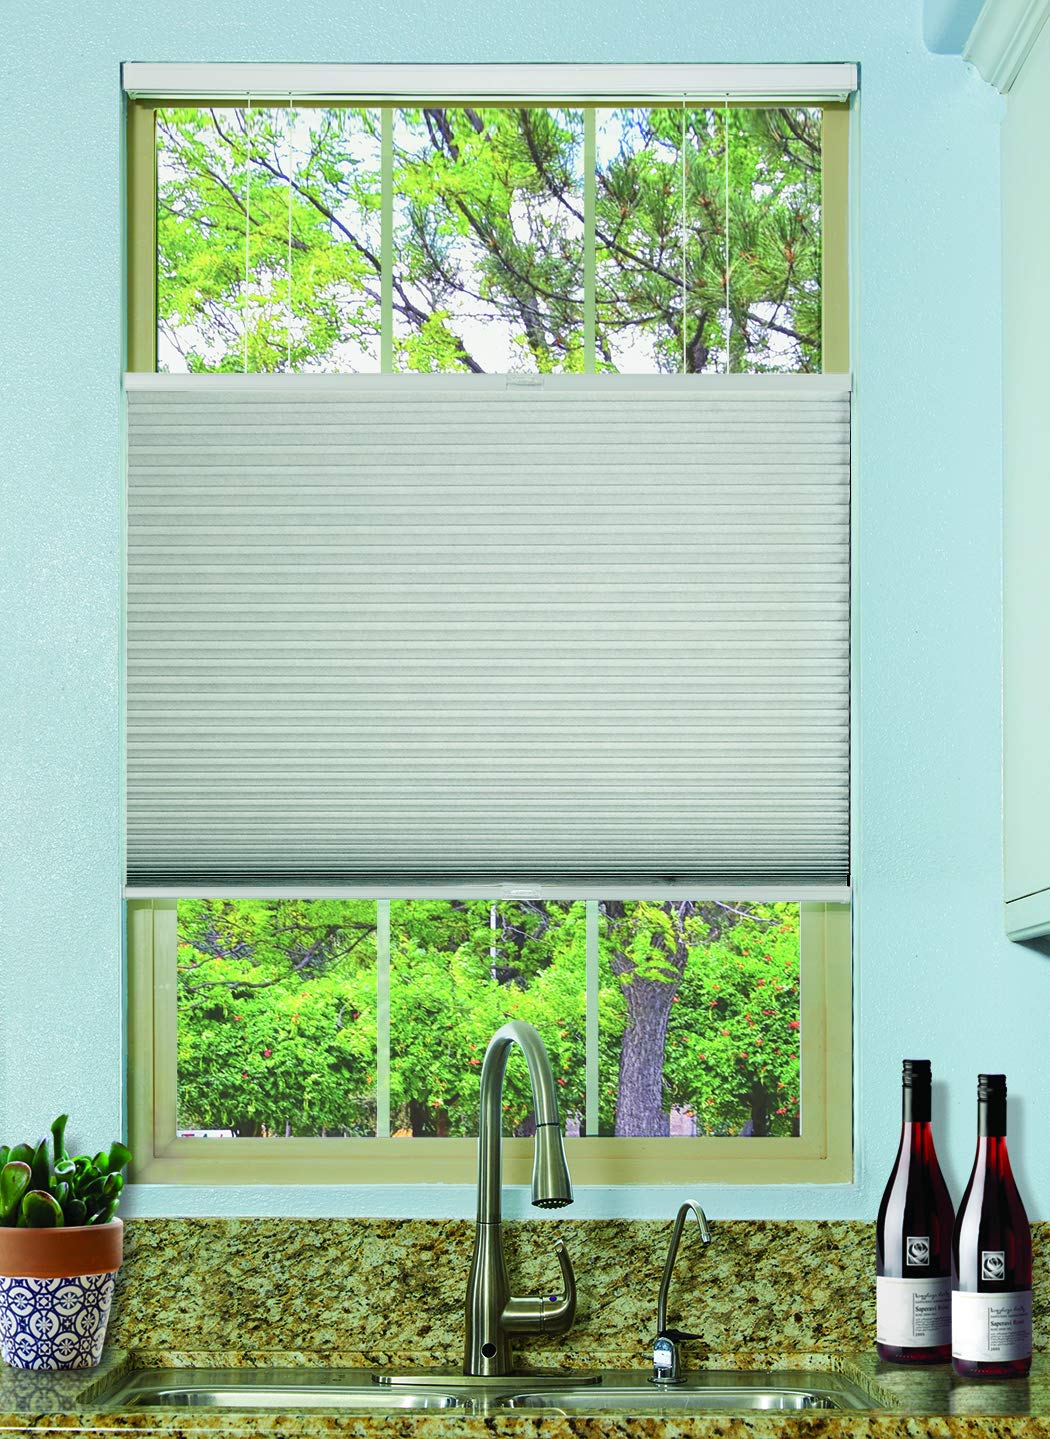 BlindsAvenue Cordless Top Down Bottom Up Cellular Honeycomb Shade, 9/16" Single Cell, Blackout, White Dove, Size: 26" W x 72" H